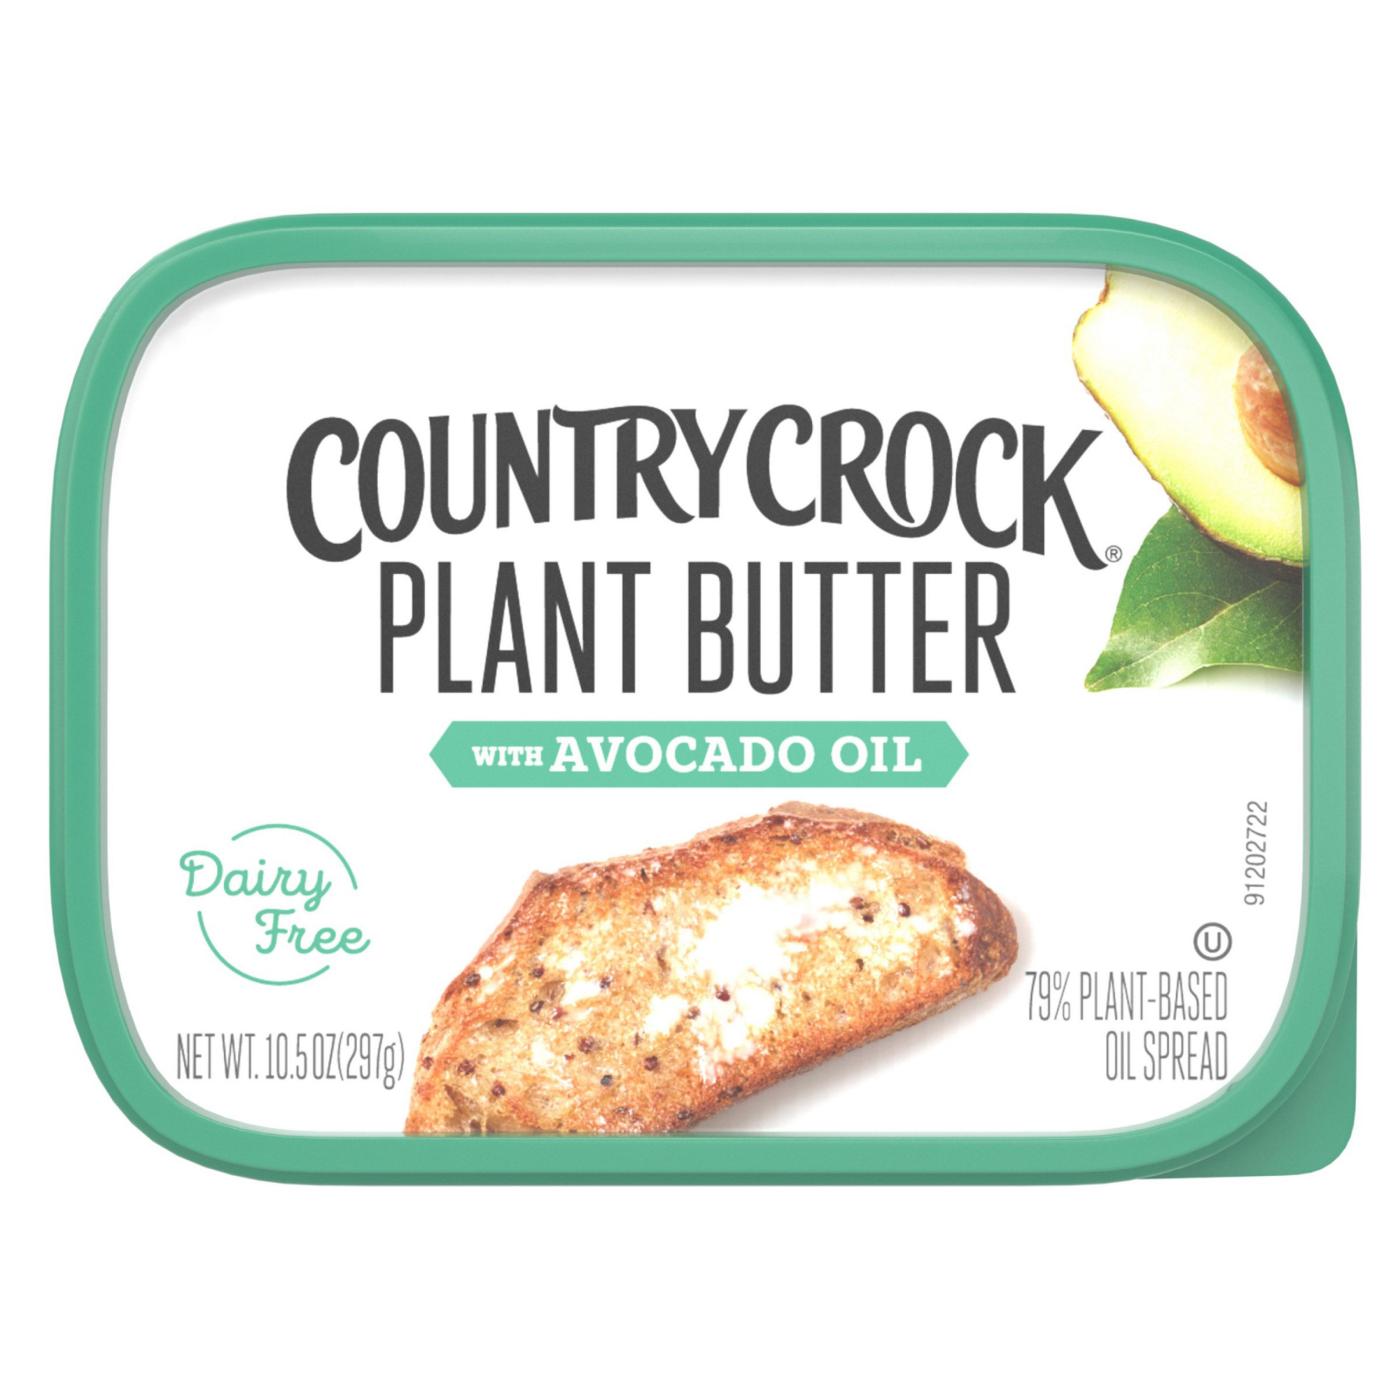 Country Crock Plant Butter with Avocado Oil Spread; image 7 of 7